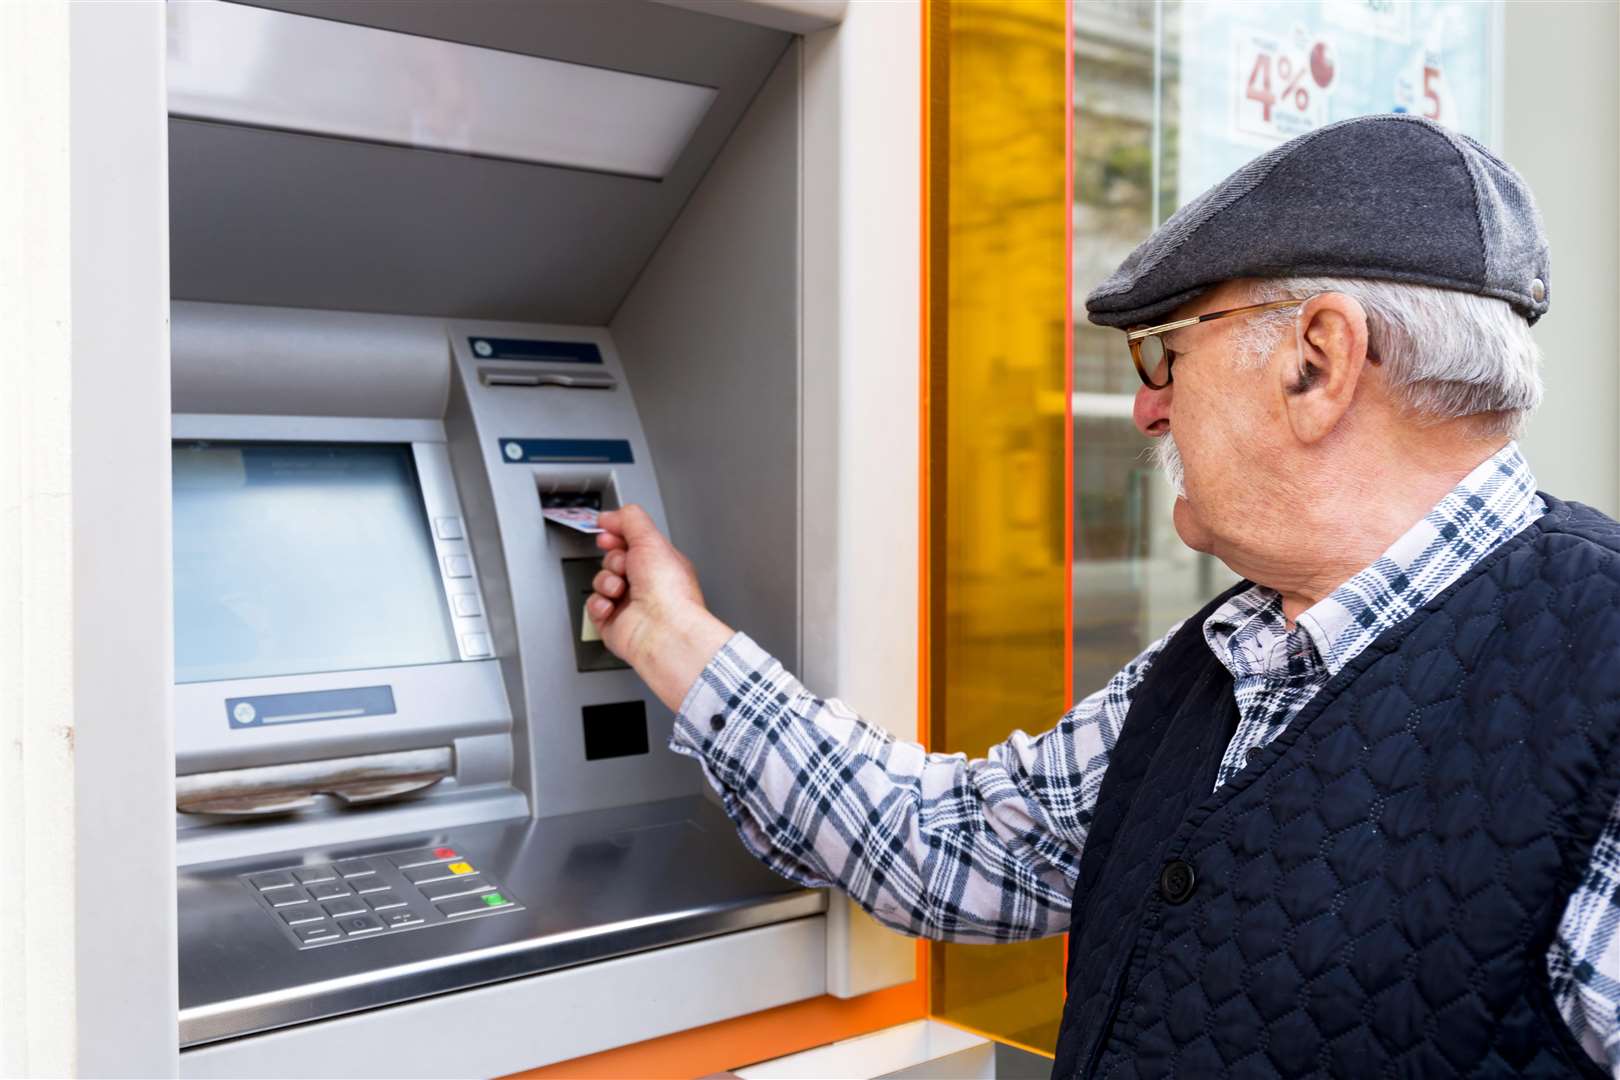 Elderly man inserting credit card to ATM outdoors. Stock image.